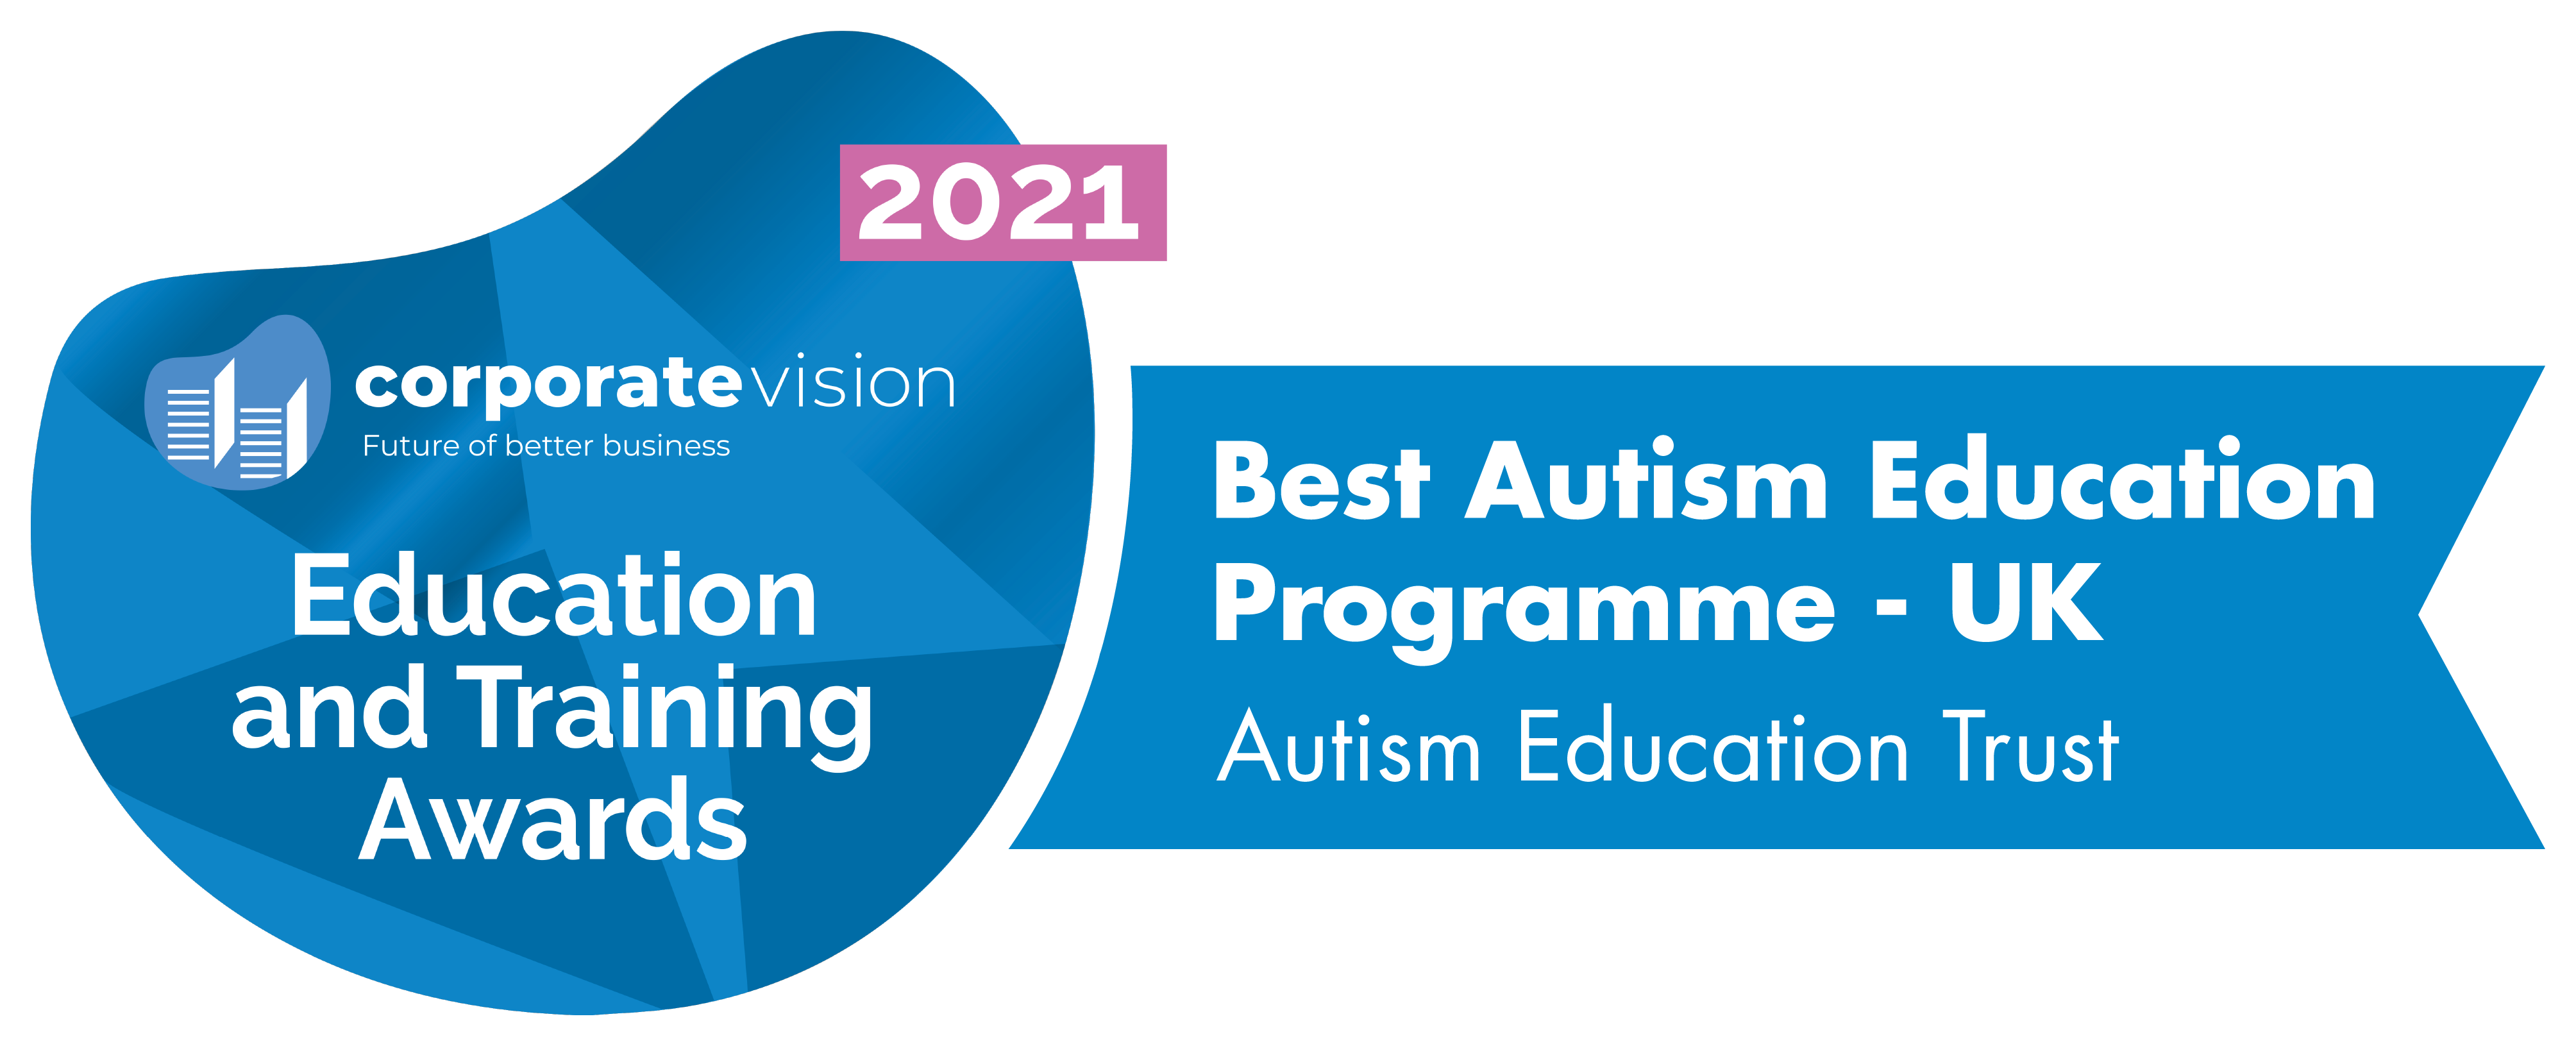 Education and Training Awards 2021, Best Autism Education Programme- UK, Autism Education Trust